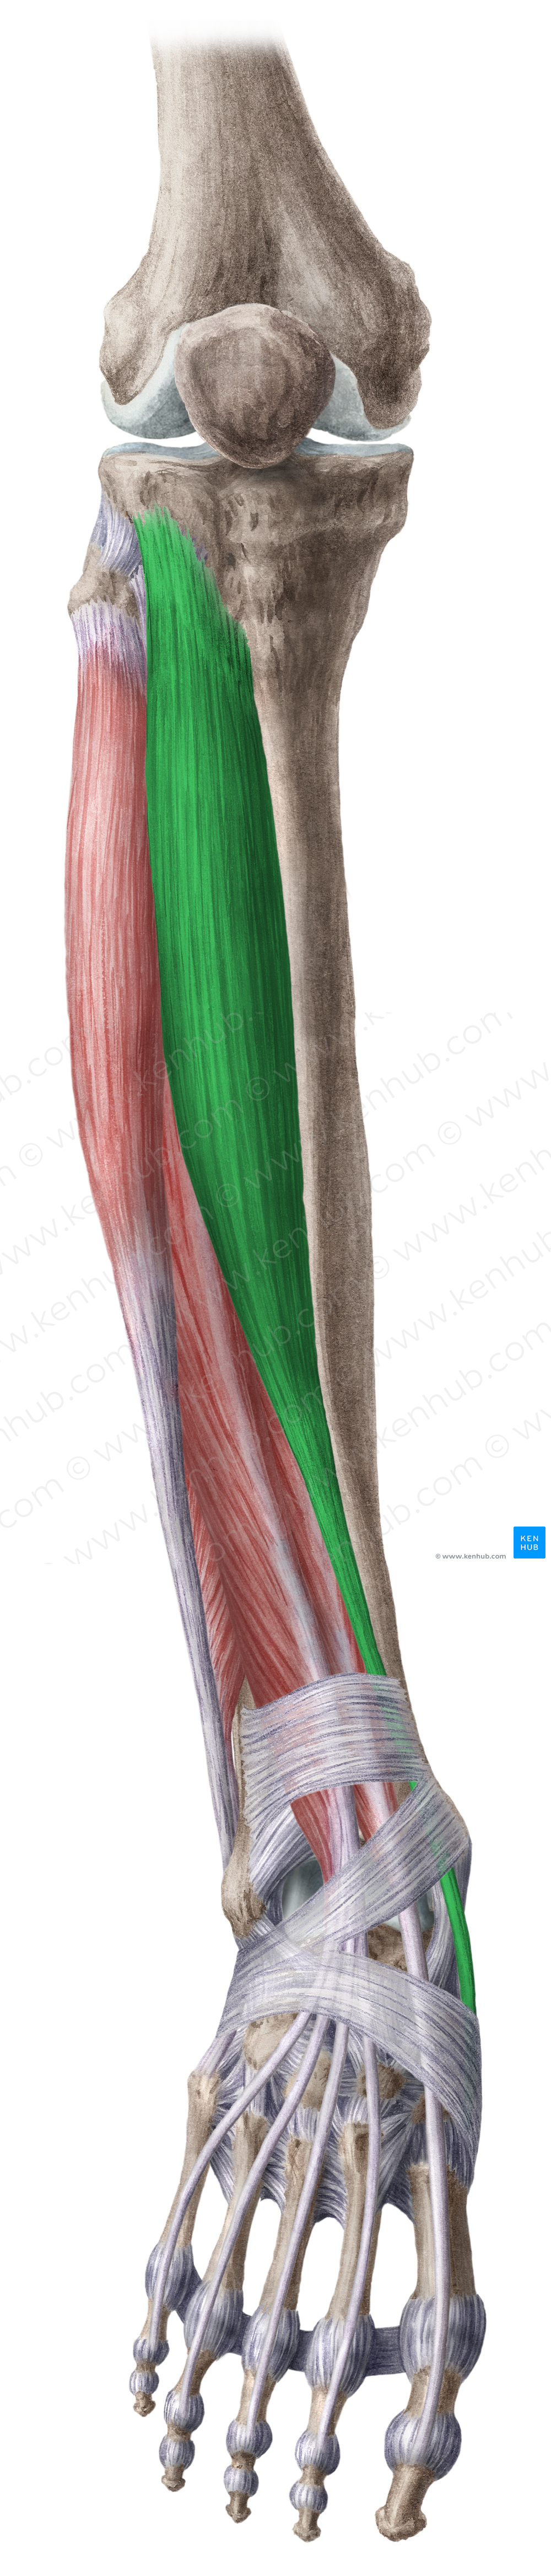 Tibialis anterior muscle (#6101)